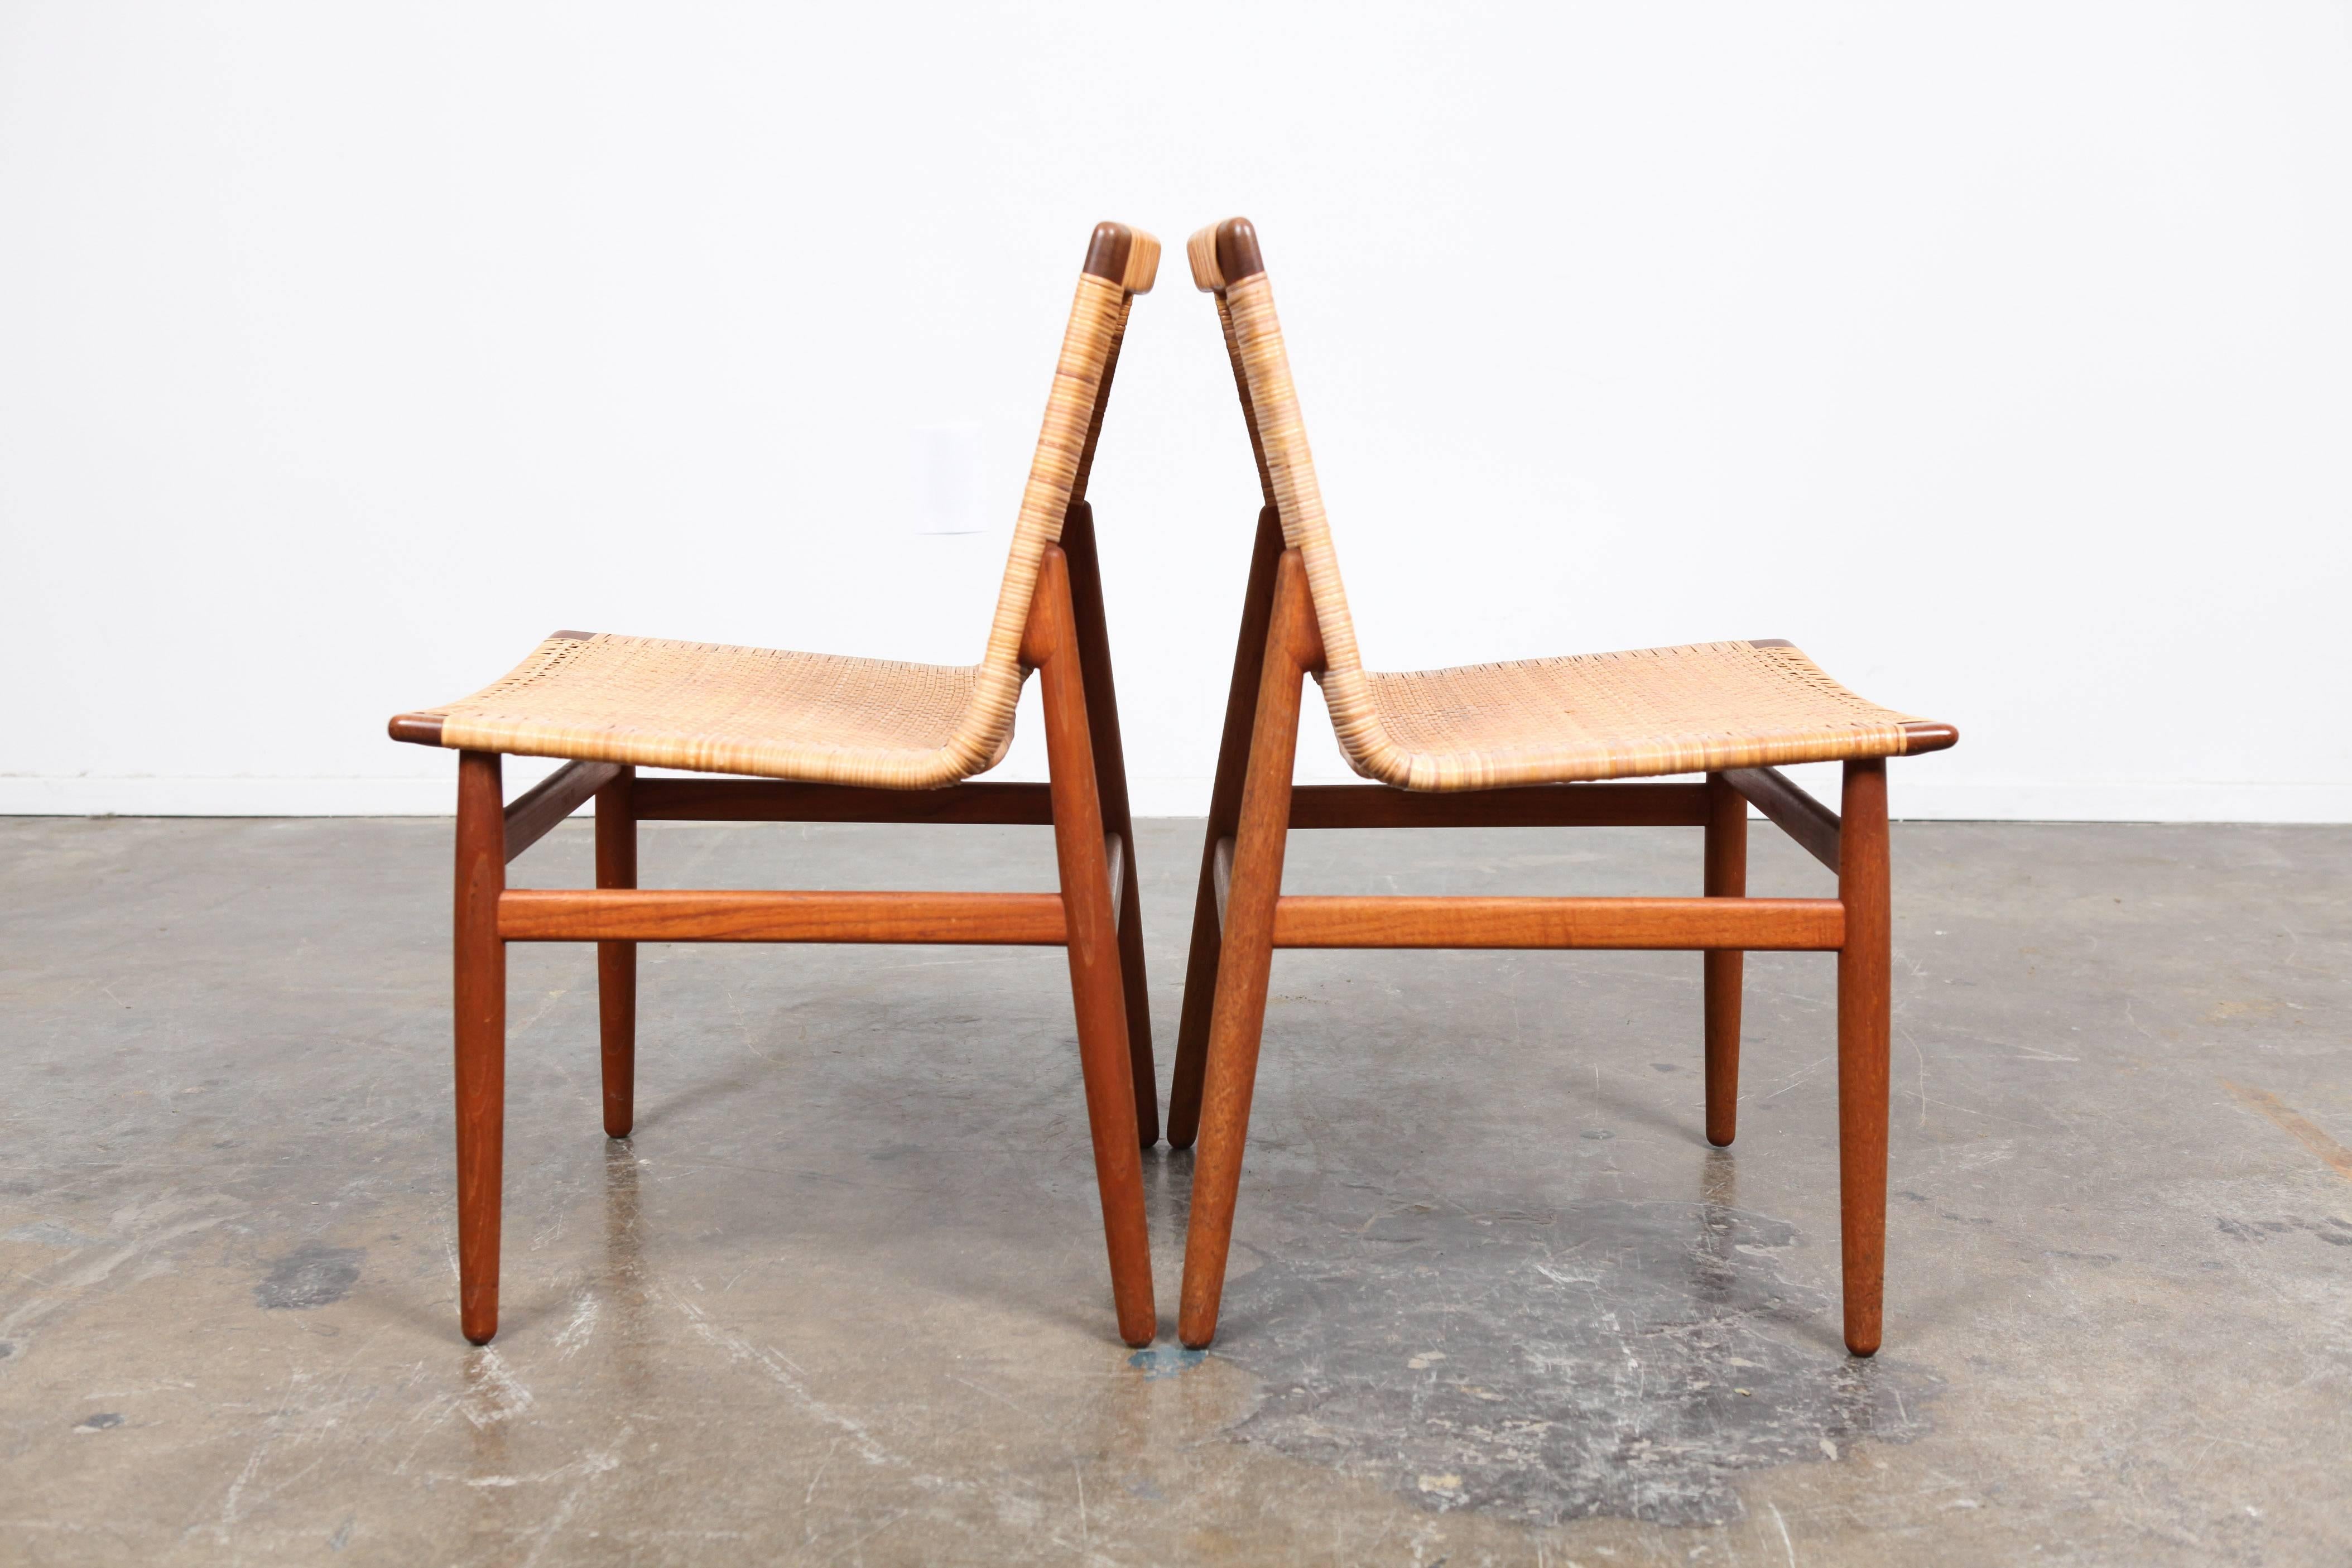 Cane Set of Four Very Rare Teak Danish Dining Chairs by Jorgen Høj